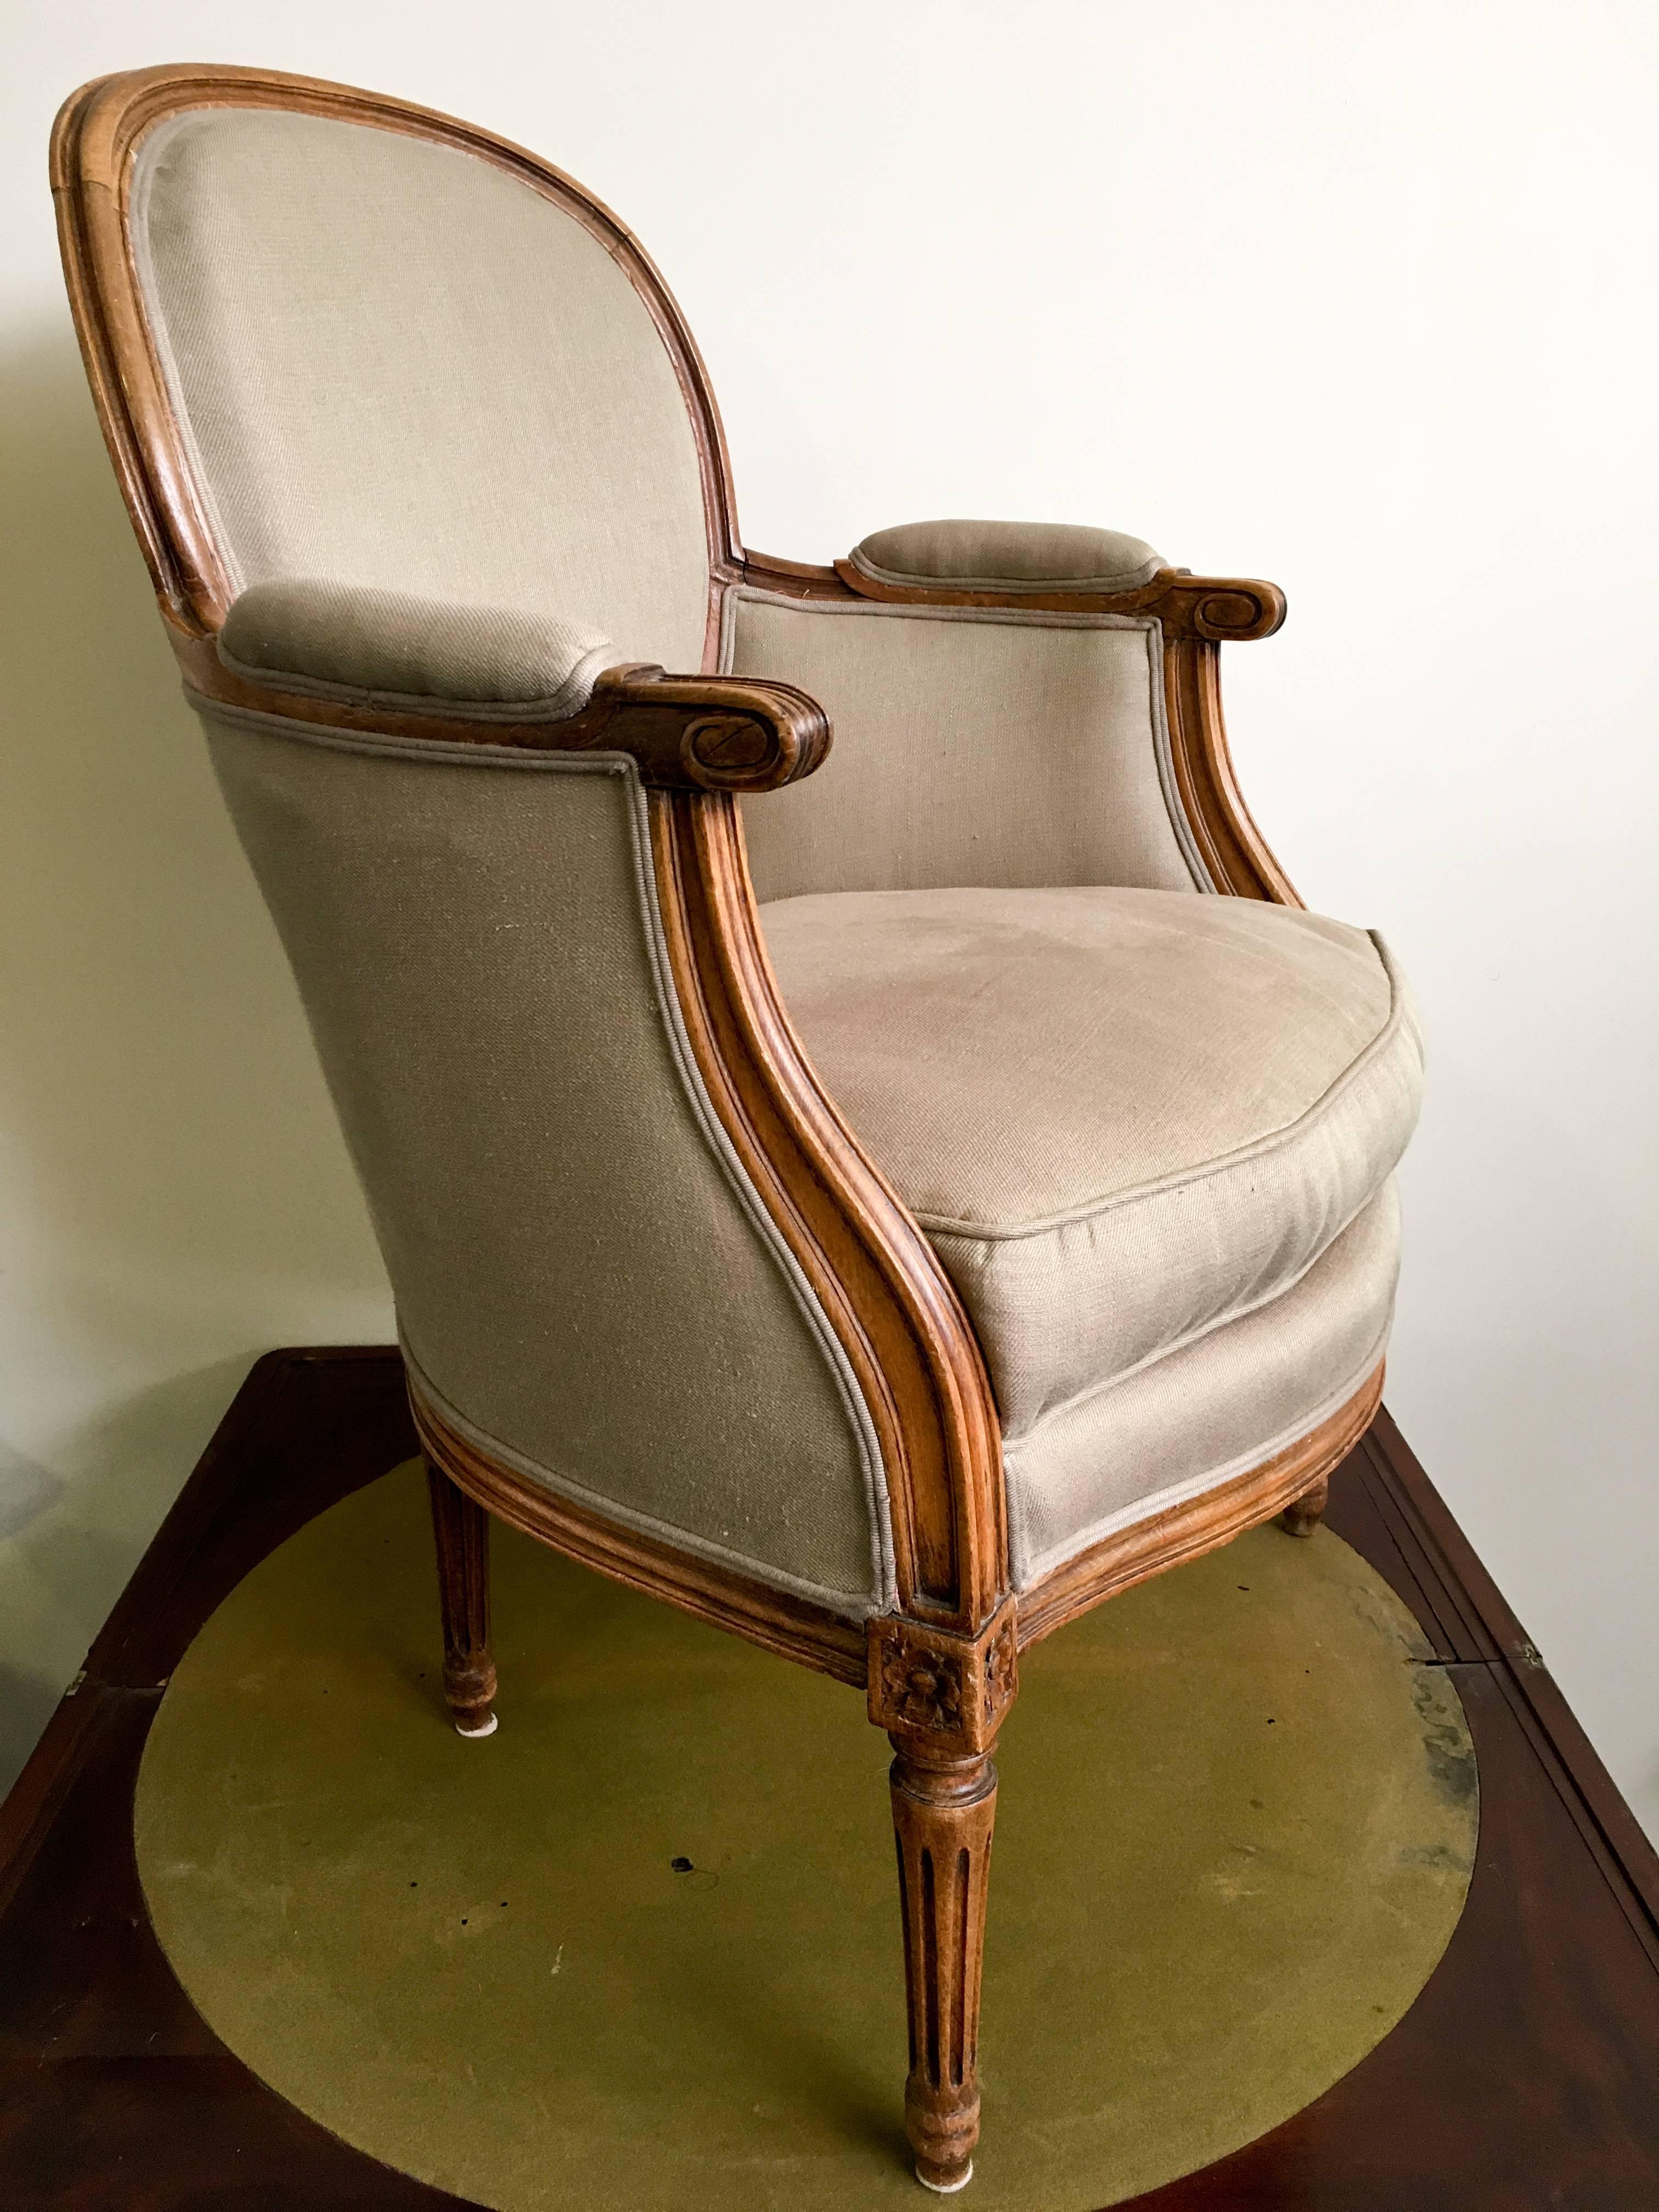 Elegant pair of antique armchairs from France, circa 1880. These chairs are made of solid walnut with curved legs and back and have been reupholstered with a beige linen fabric. Very confortable and cozy. Perfect condition.